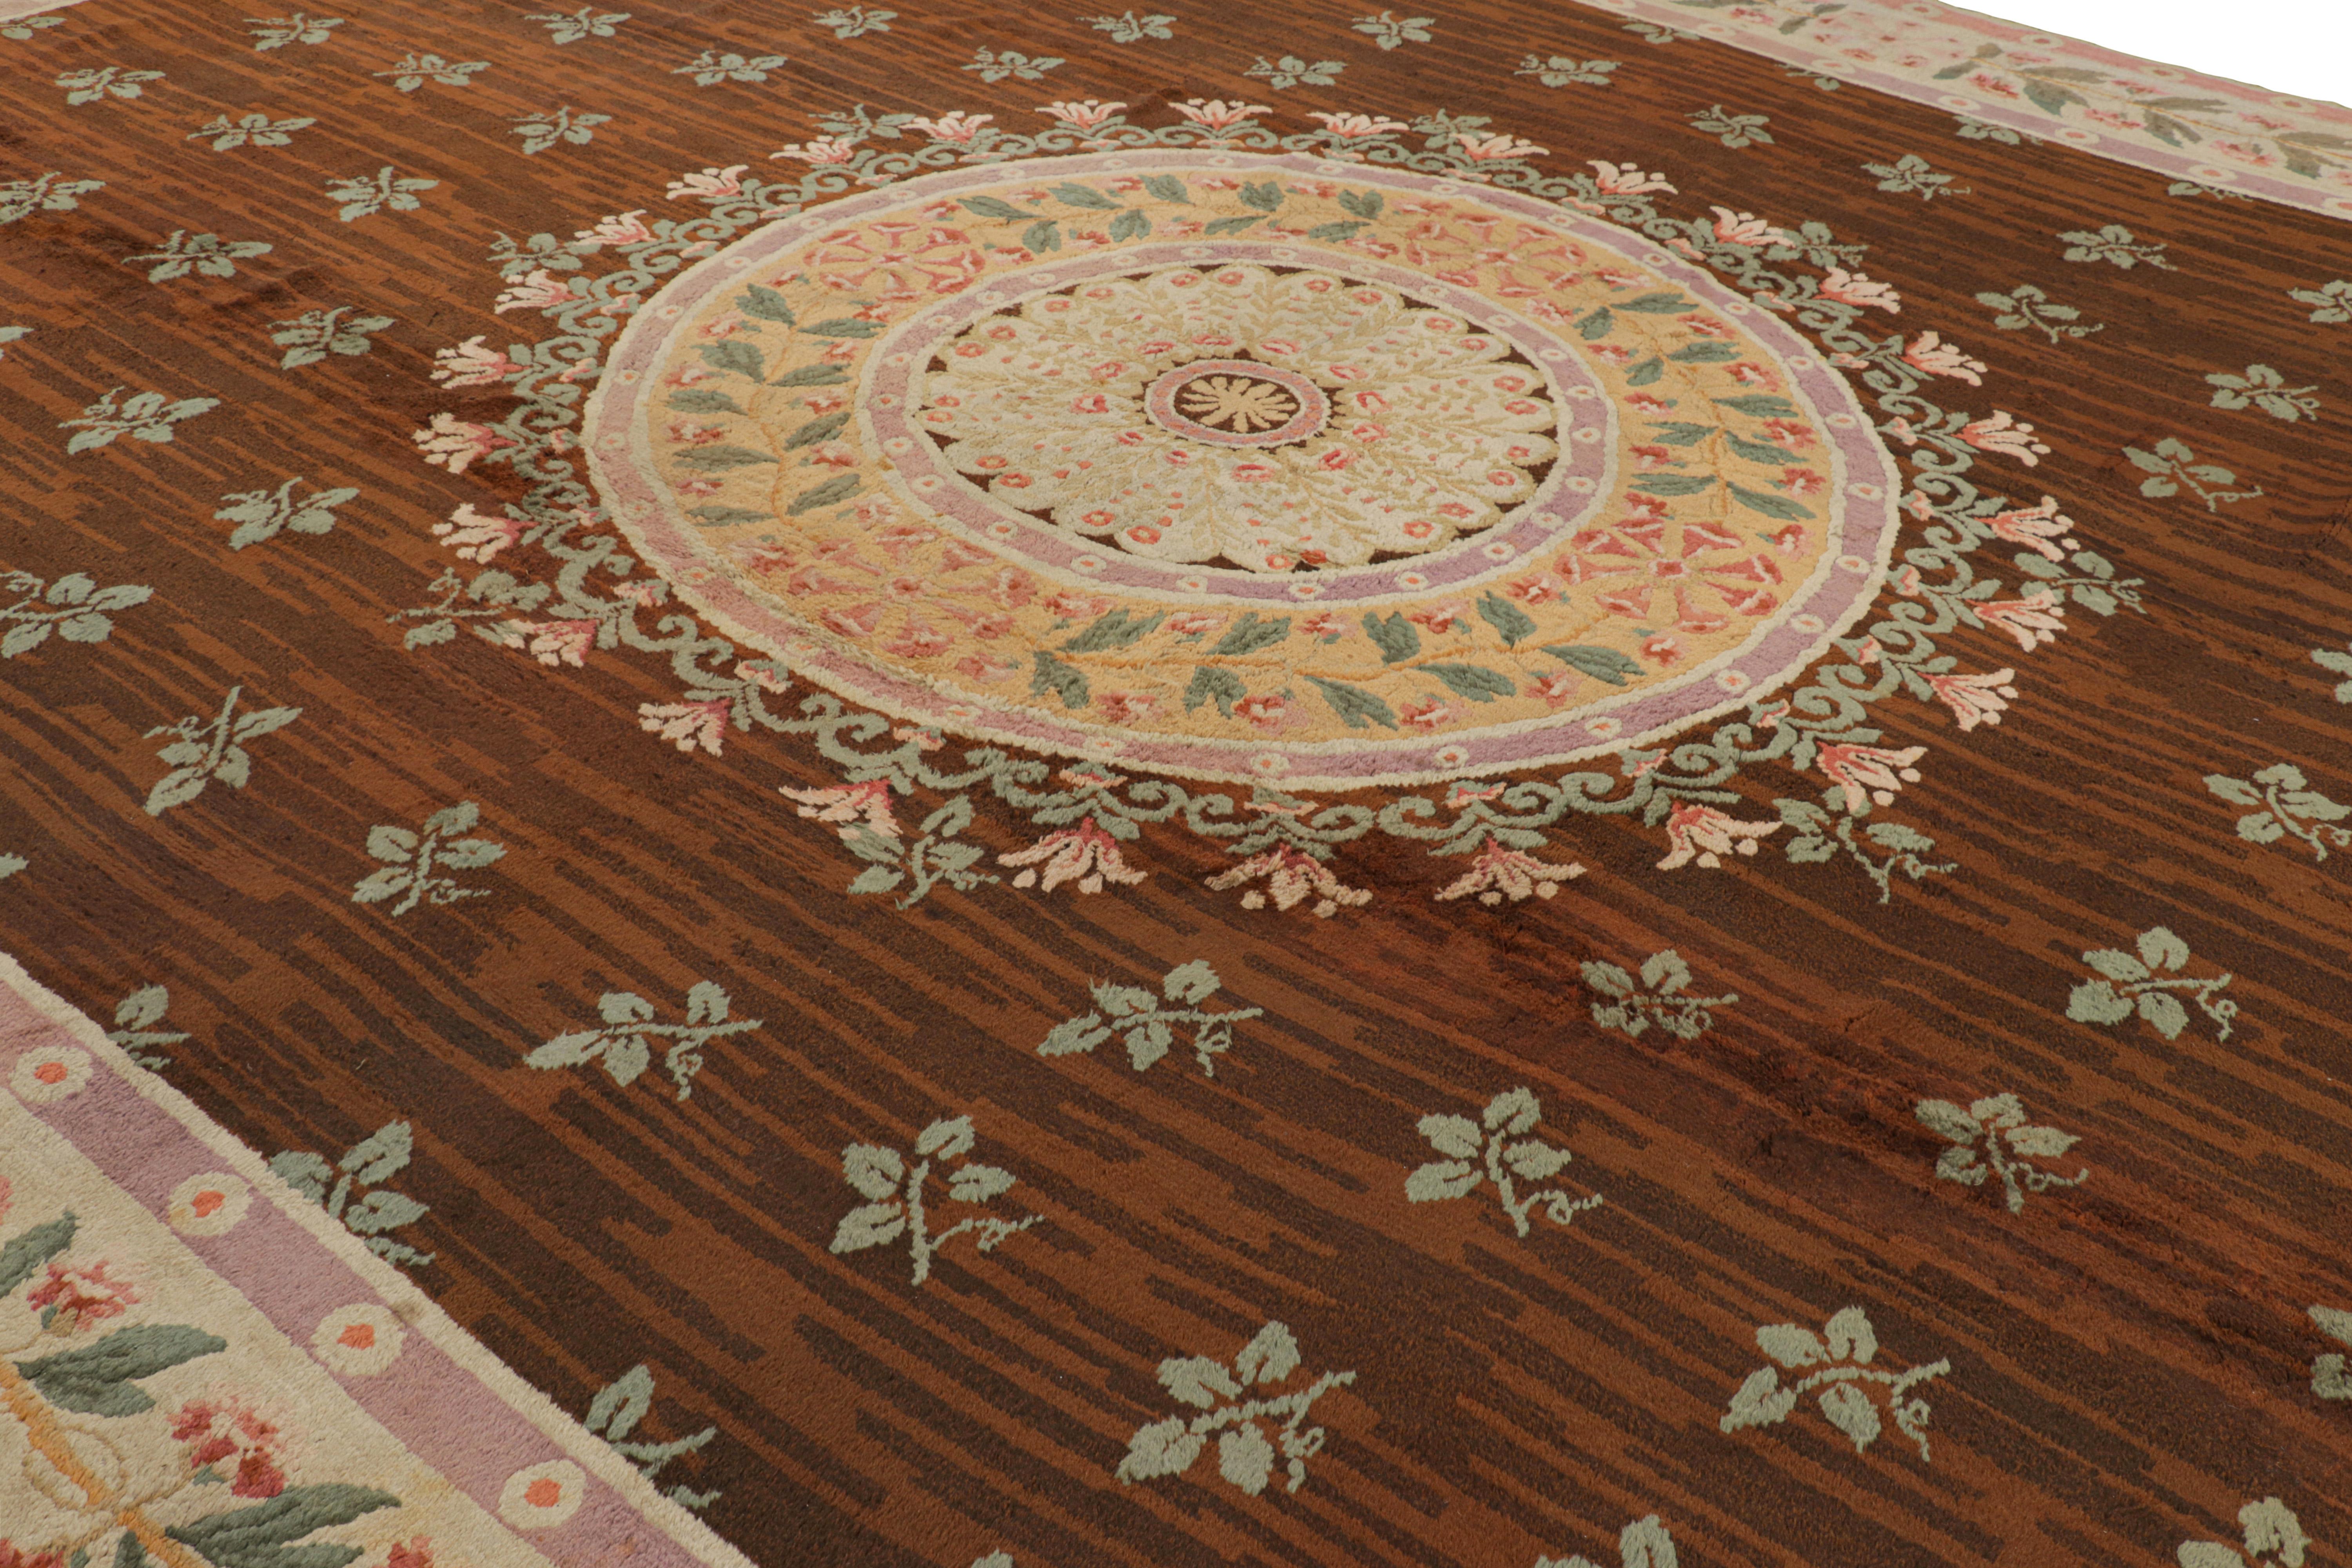 Hand-knotted in wool from France circa 1890, this 13x18 Antique French Savonnerie rug in the Neoclassical style is a rare masterpiece from our European rug collection. Its design enjoys floral patterns and an elegant medallion, as well as wide range